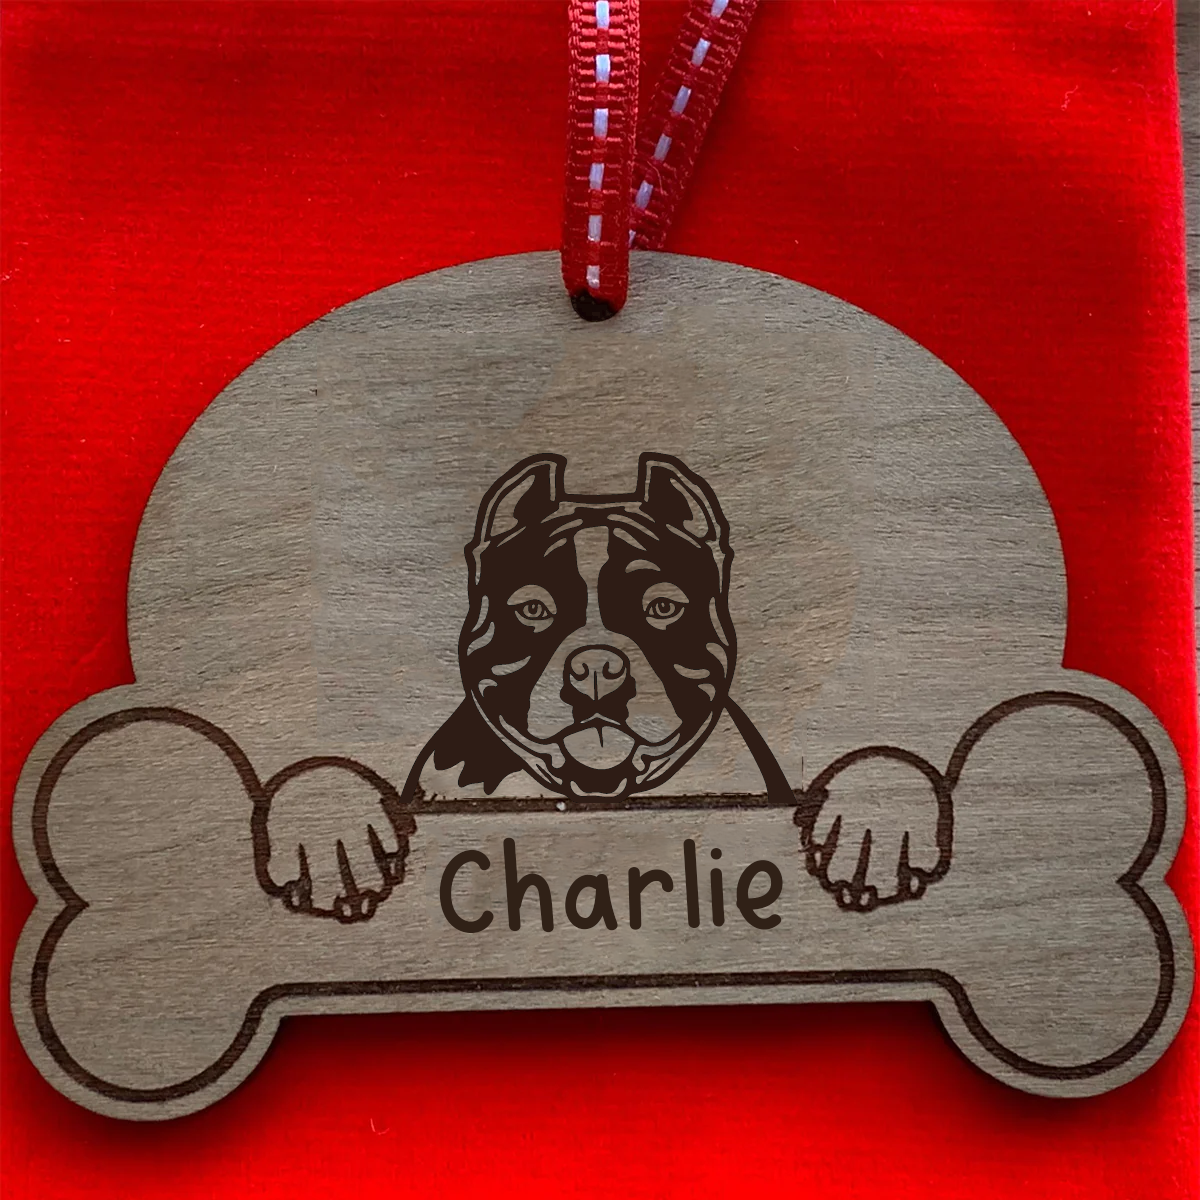 Dog Breed Christmas Bauble 1